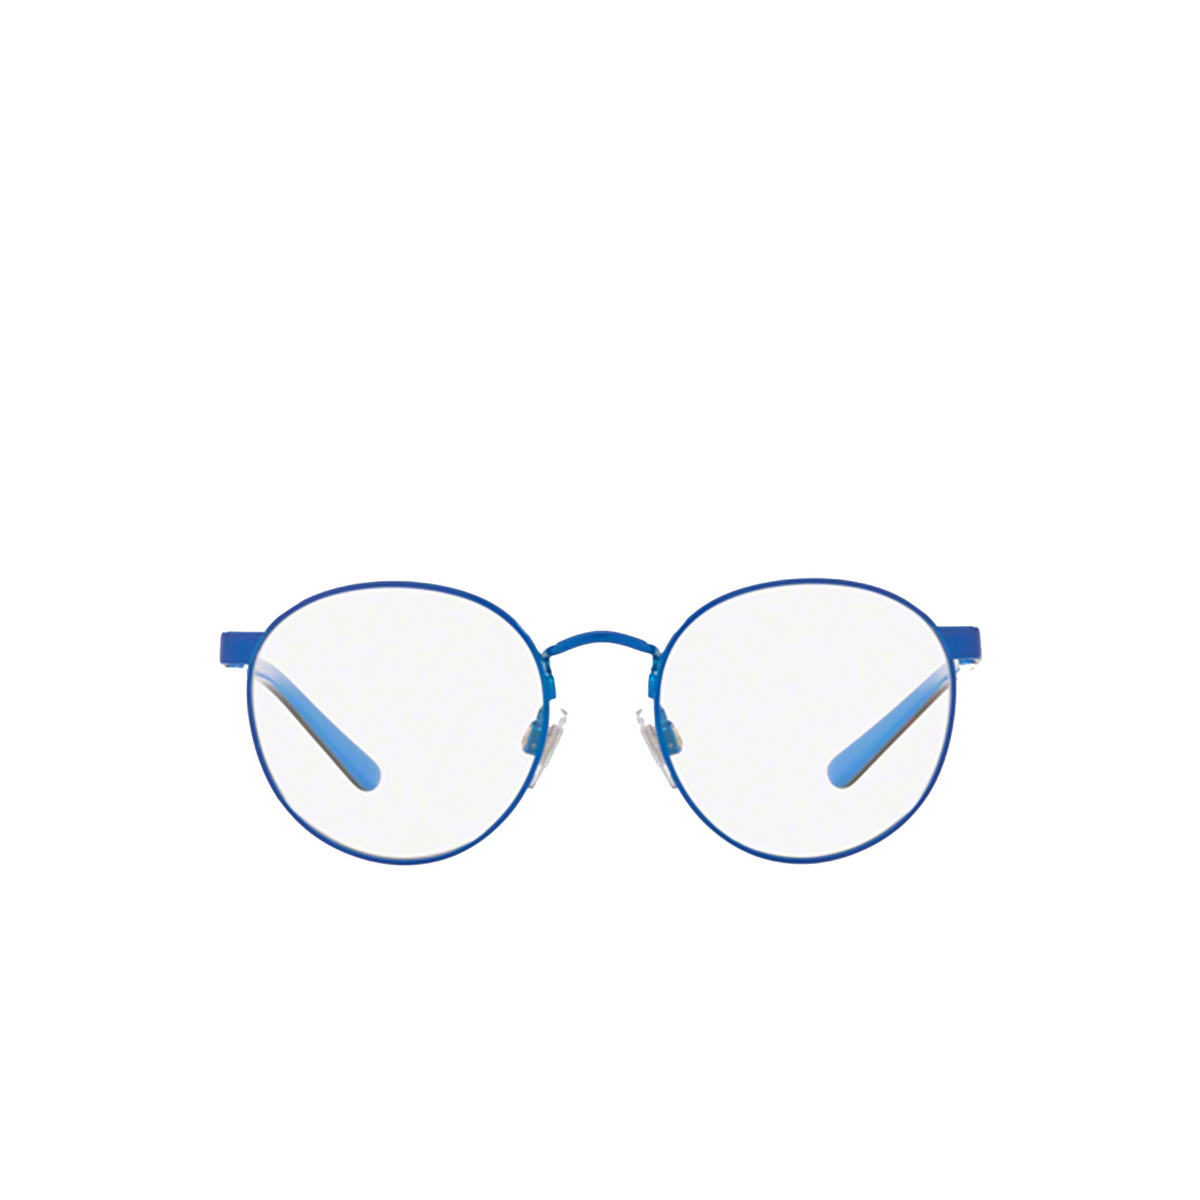 Polo Ralph Lauren® Round Eyeglasses: PP8040 color Shiny Electric Blue 9102 - front view.